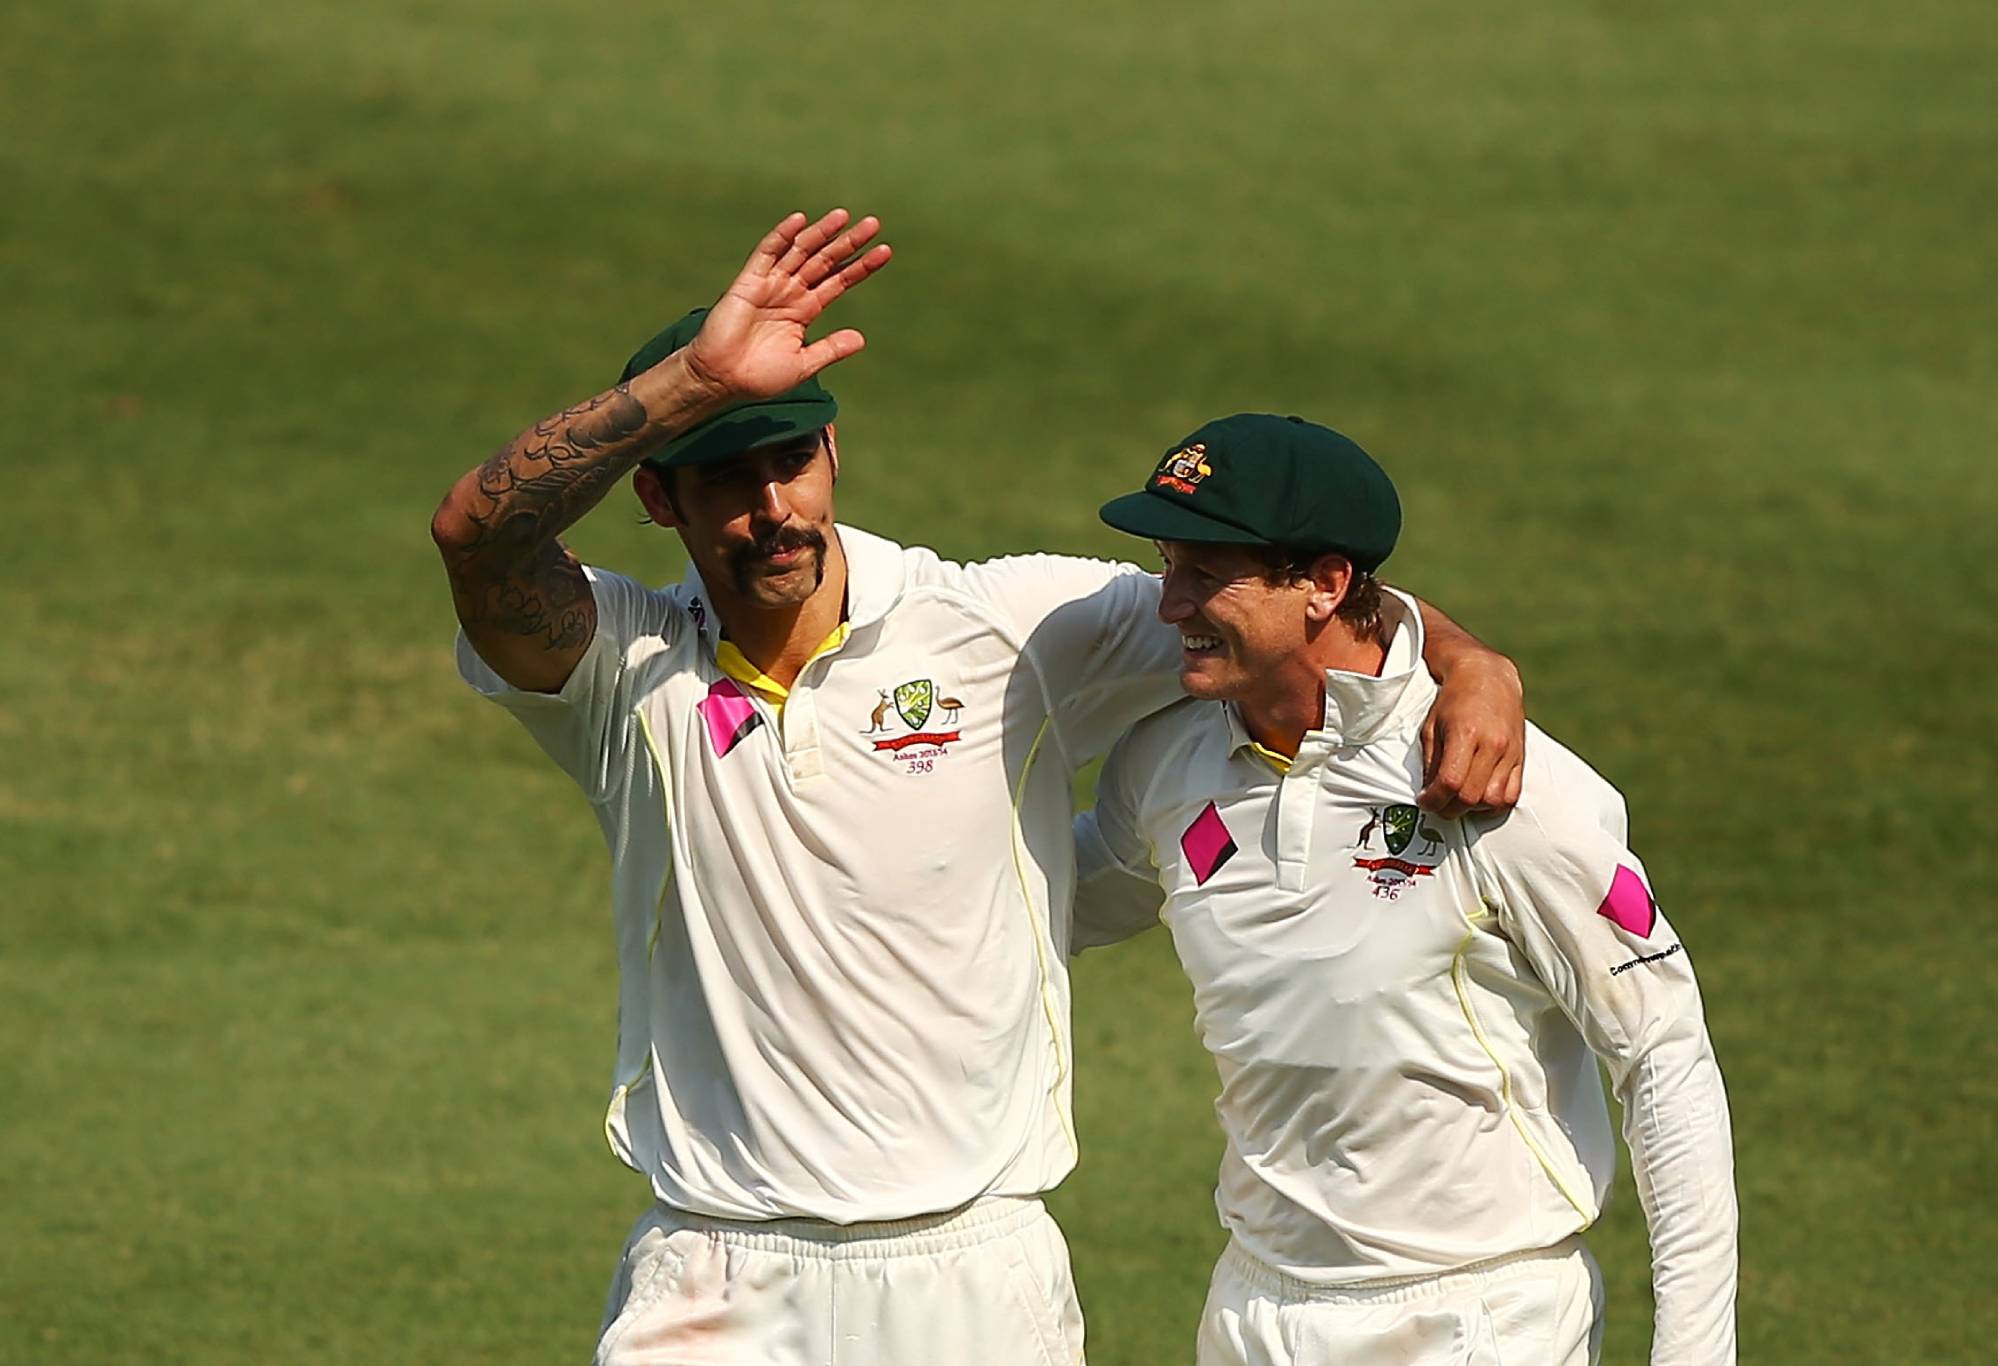 SYDNEY, AUSTRALIA - JANUARY 05: Mitchell Johnson (L) and George Bailey (R) of Australia celebrate after winning the test and the series 5-0 during day three of the Fifth Ashes Test match between Australia and England at Sydney Cricket Ground on January 5, 2014 in Sydney, Australia. (Photo by Matt King/Getty Images)